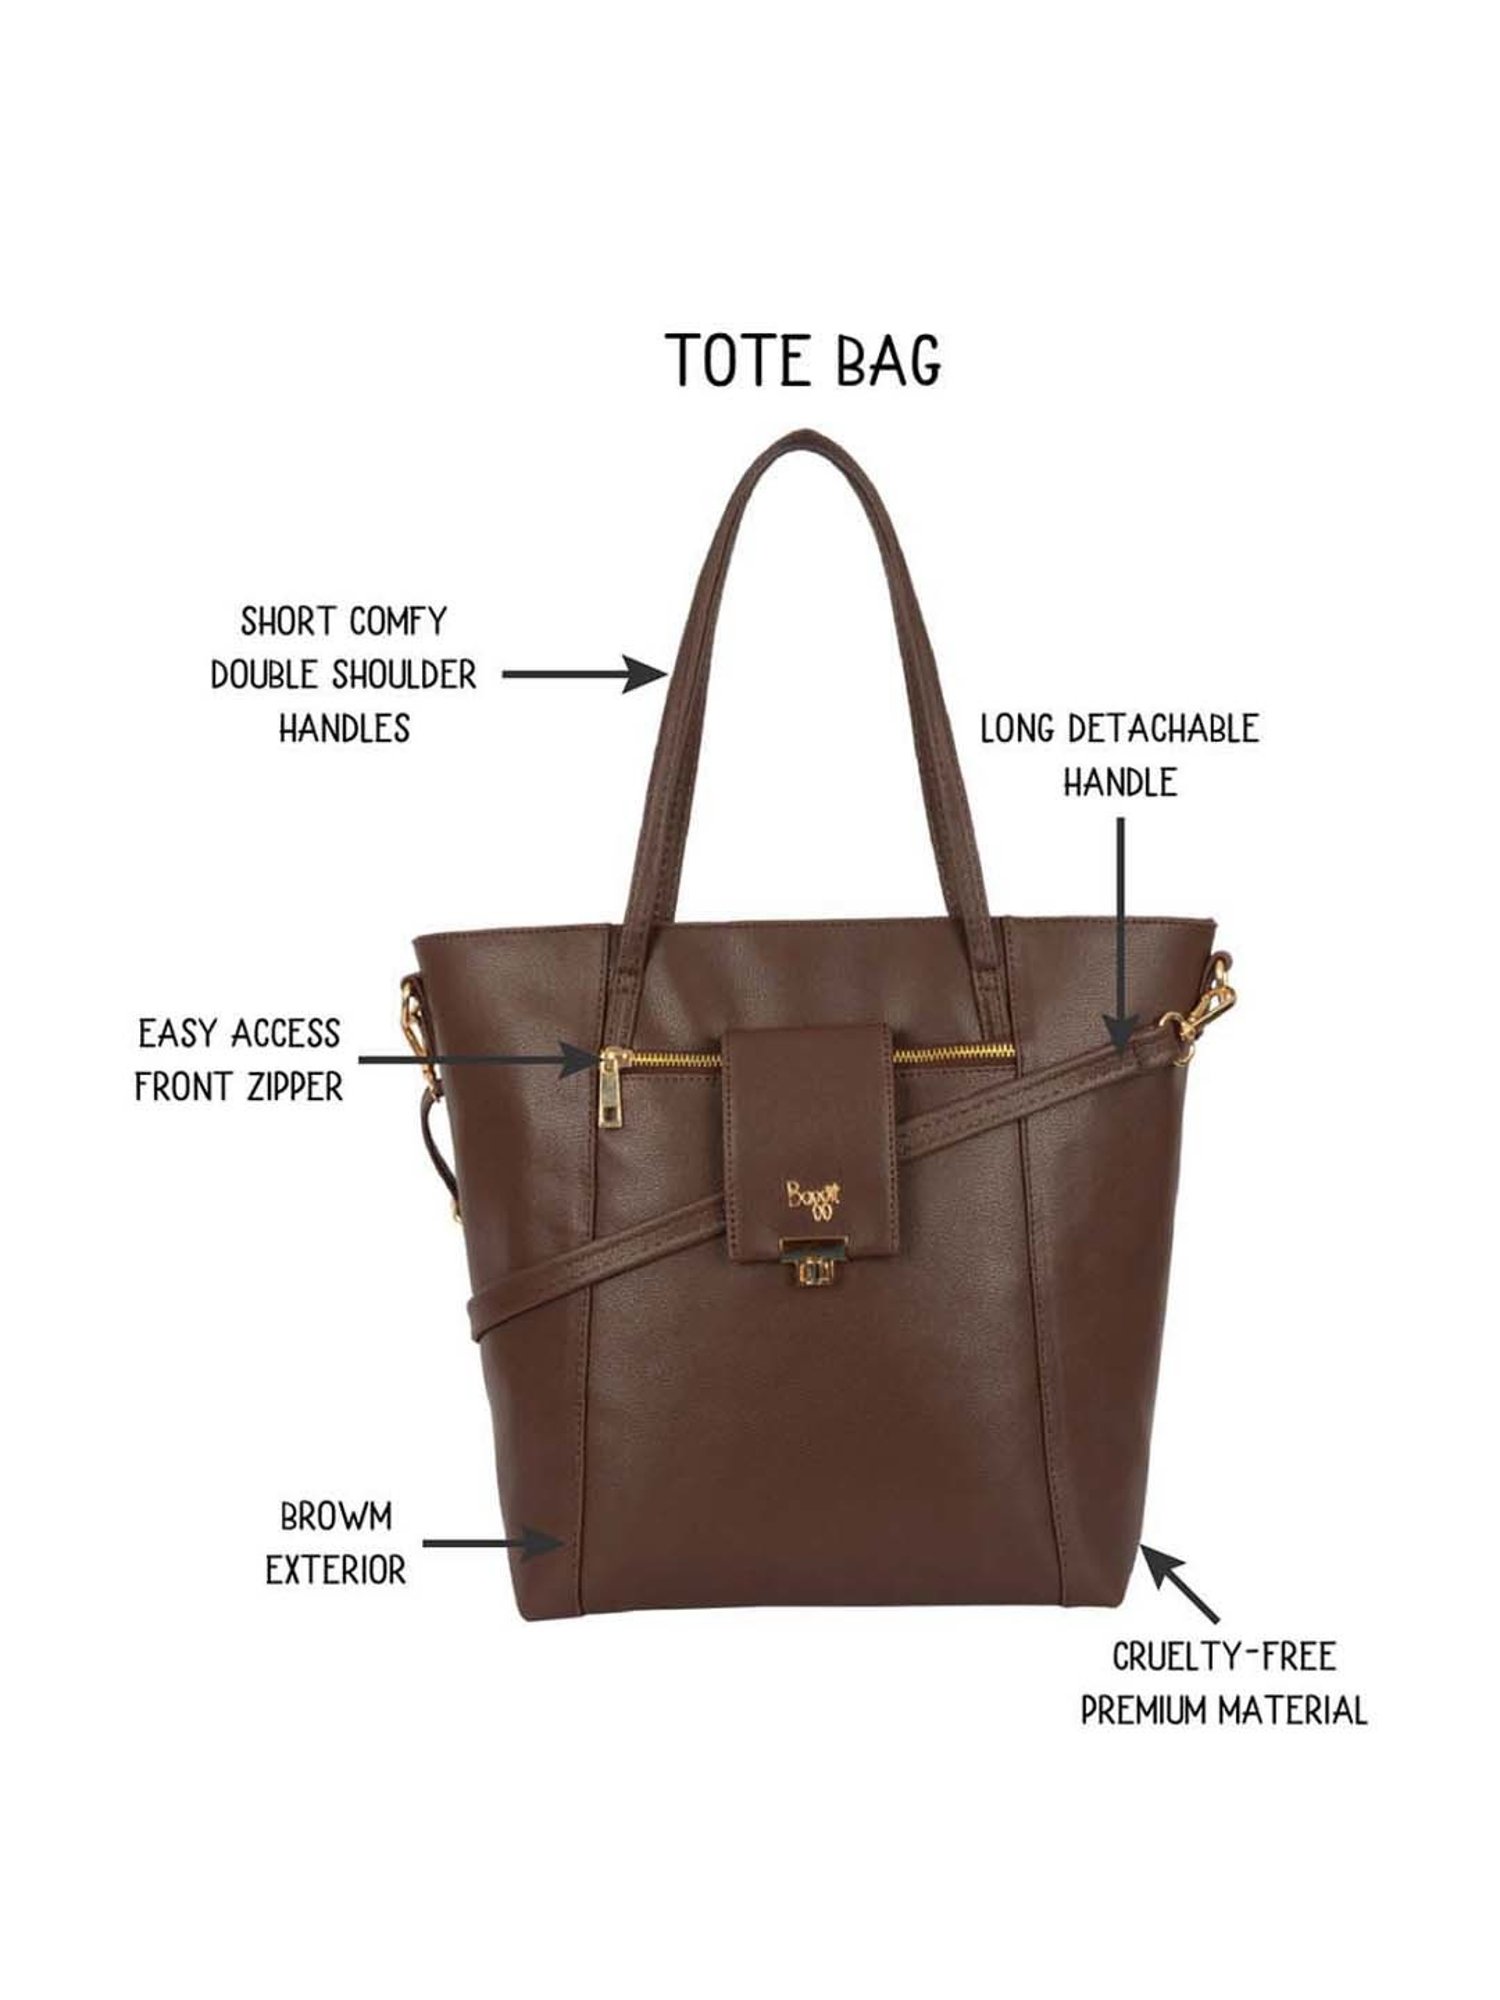 Large tote bag with double handles and shoulder strap